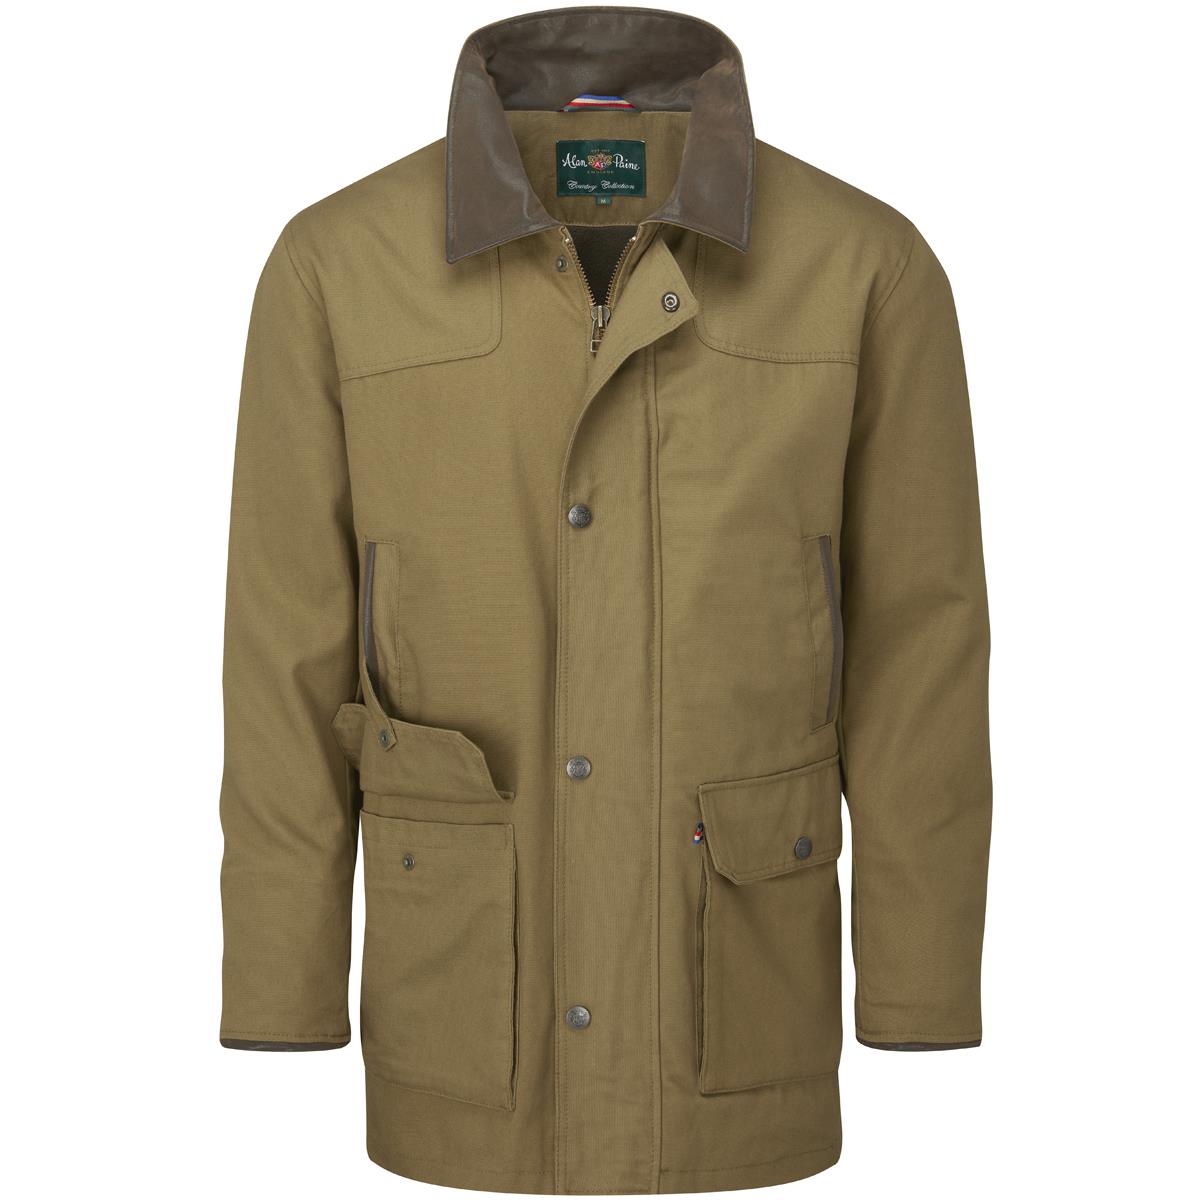 What is the chest size for the Alan Paine Kexby coat in large and extra large?